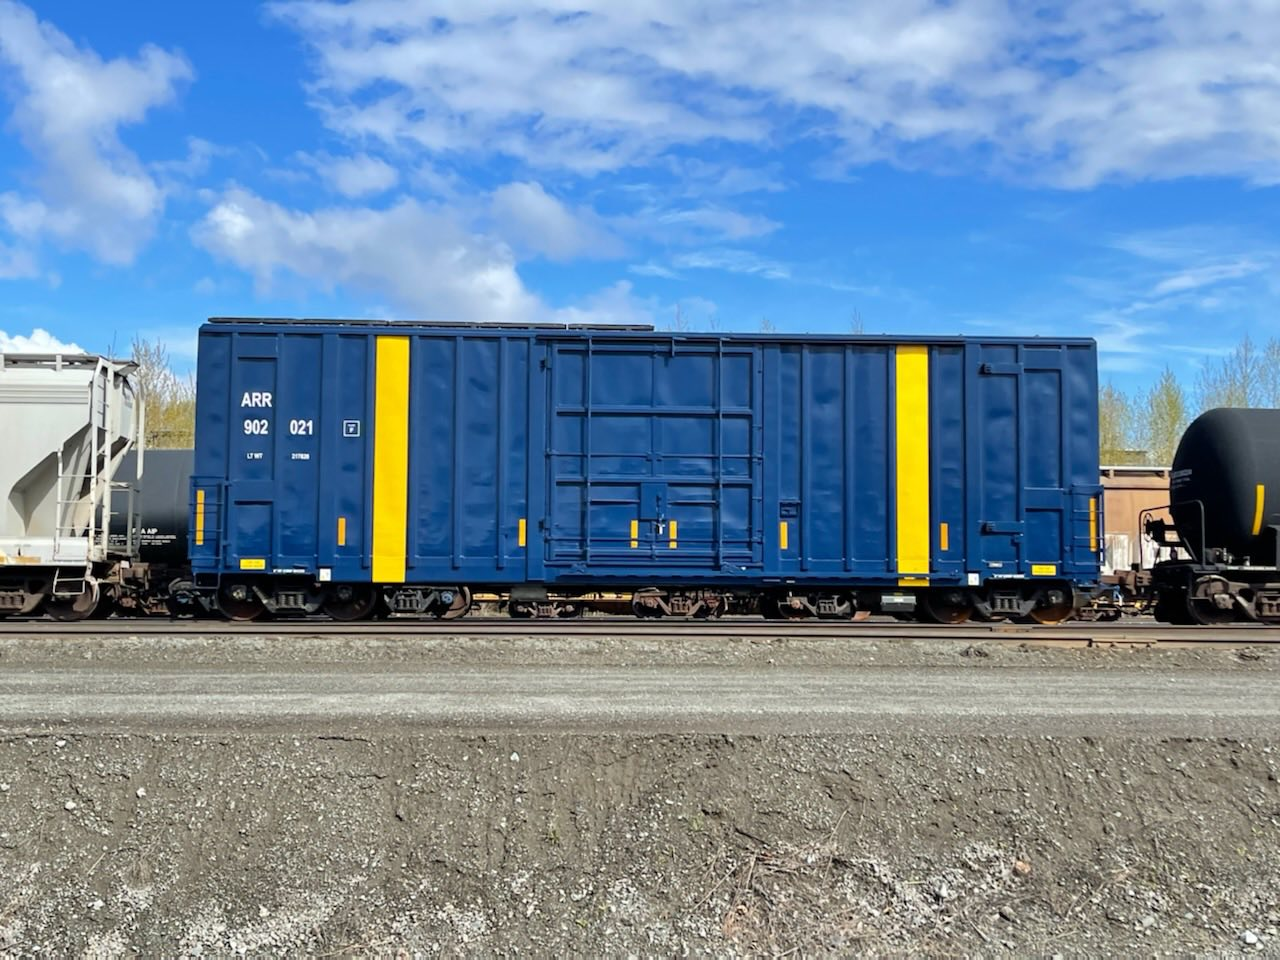 New track geometry car in Anchorage, 5/13/22